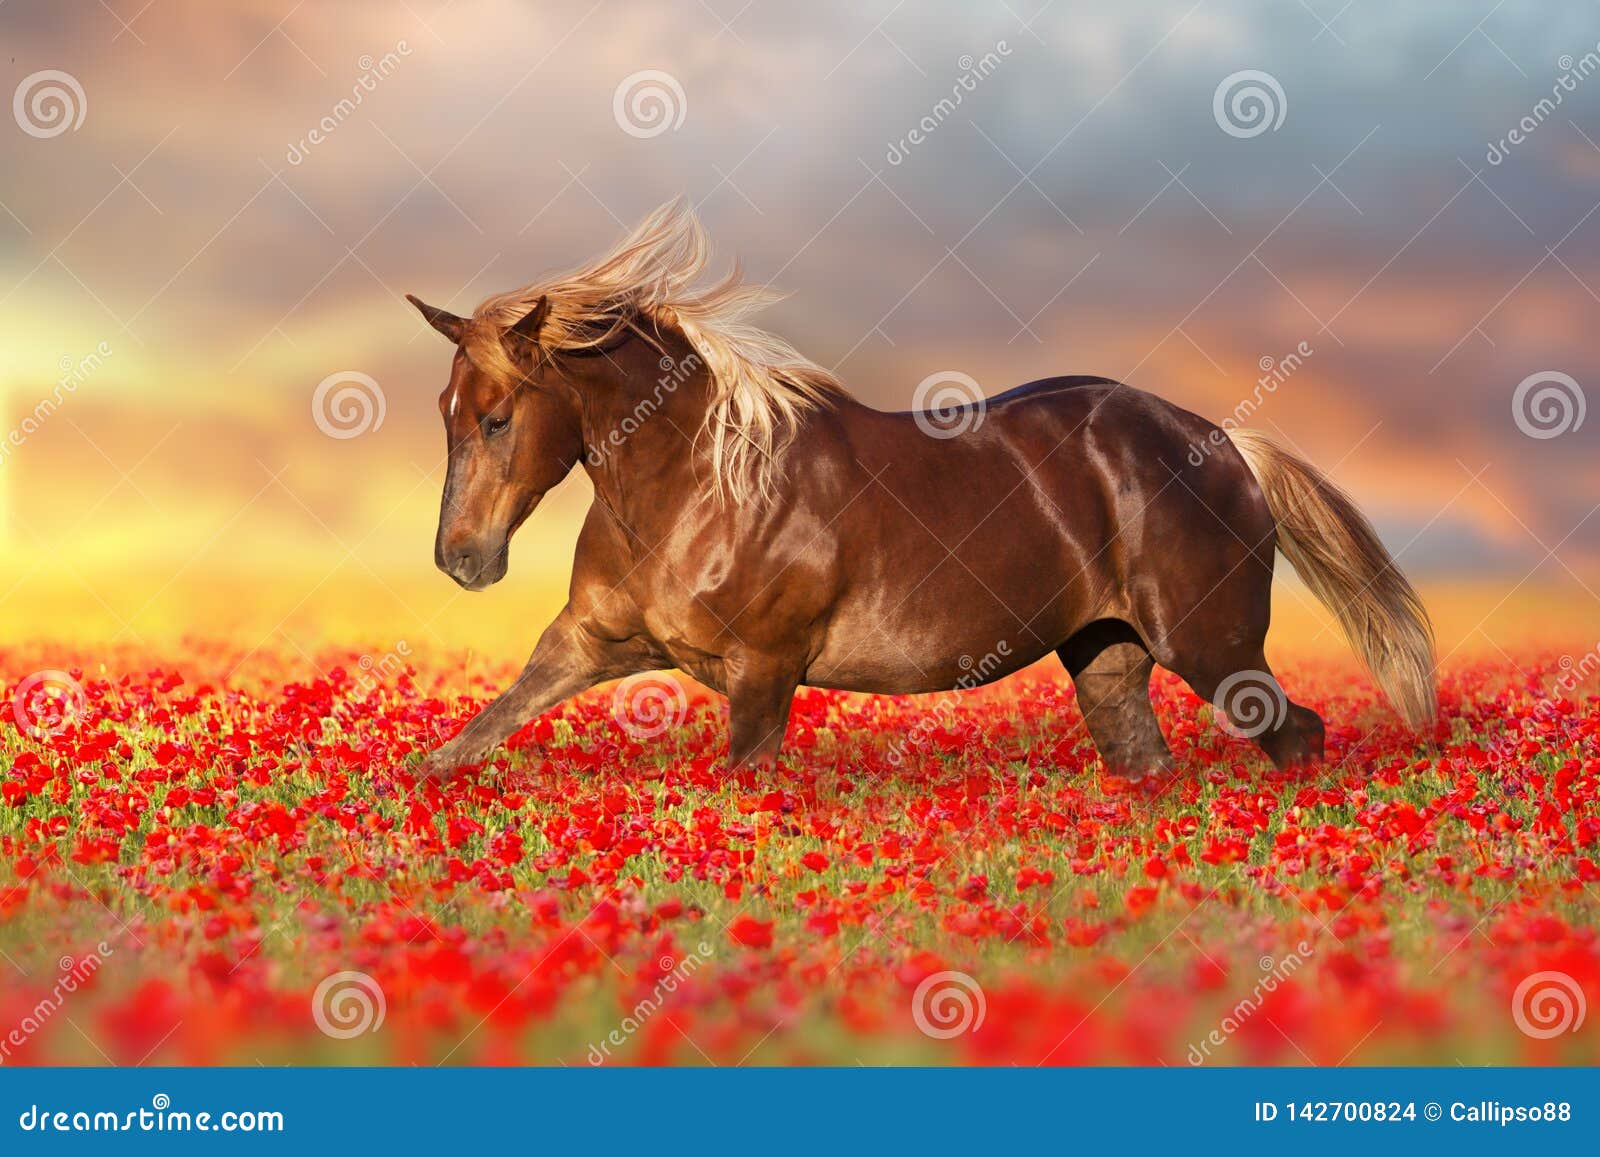 Red horse in poppy flowers stock photo. Image of long - 142700824